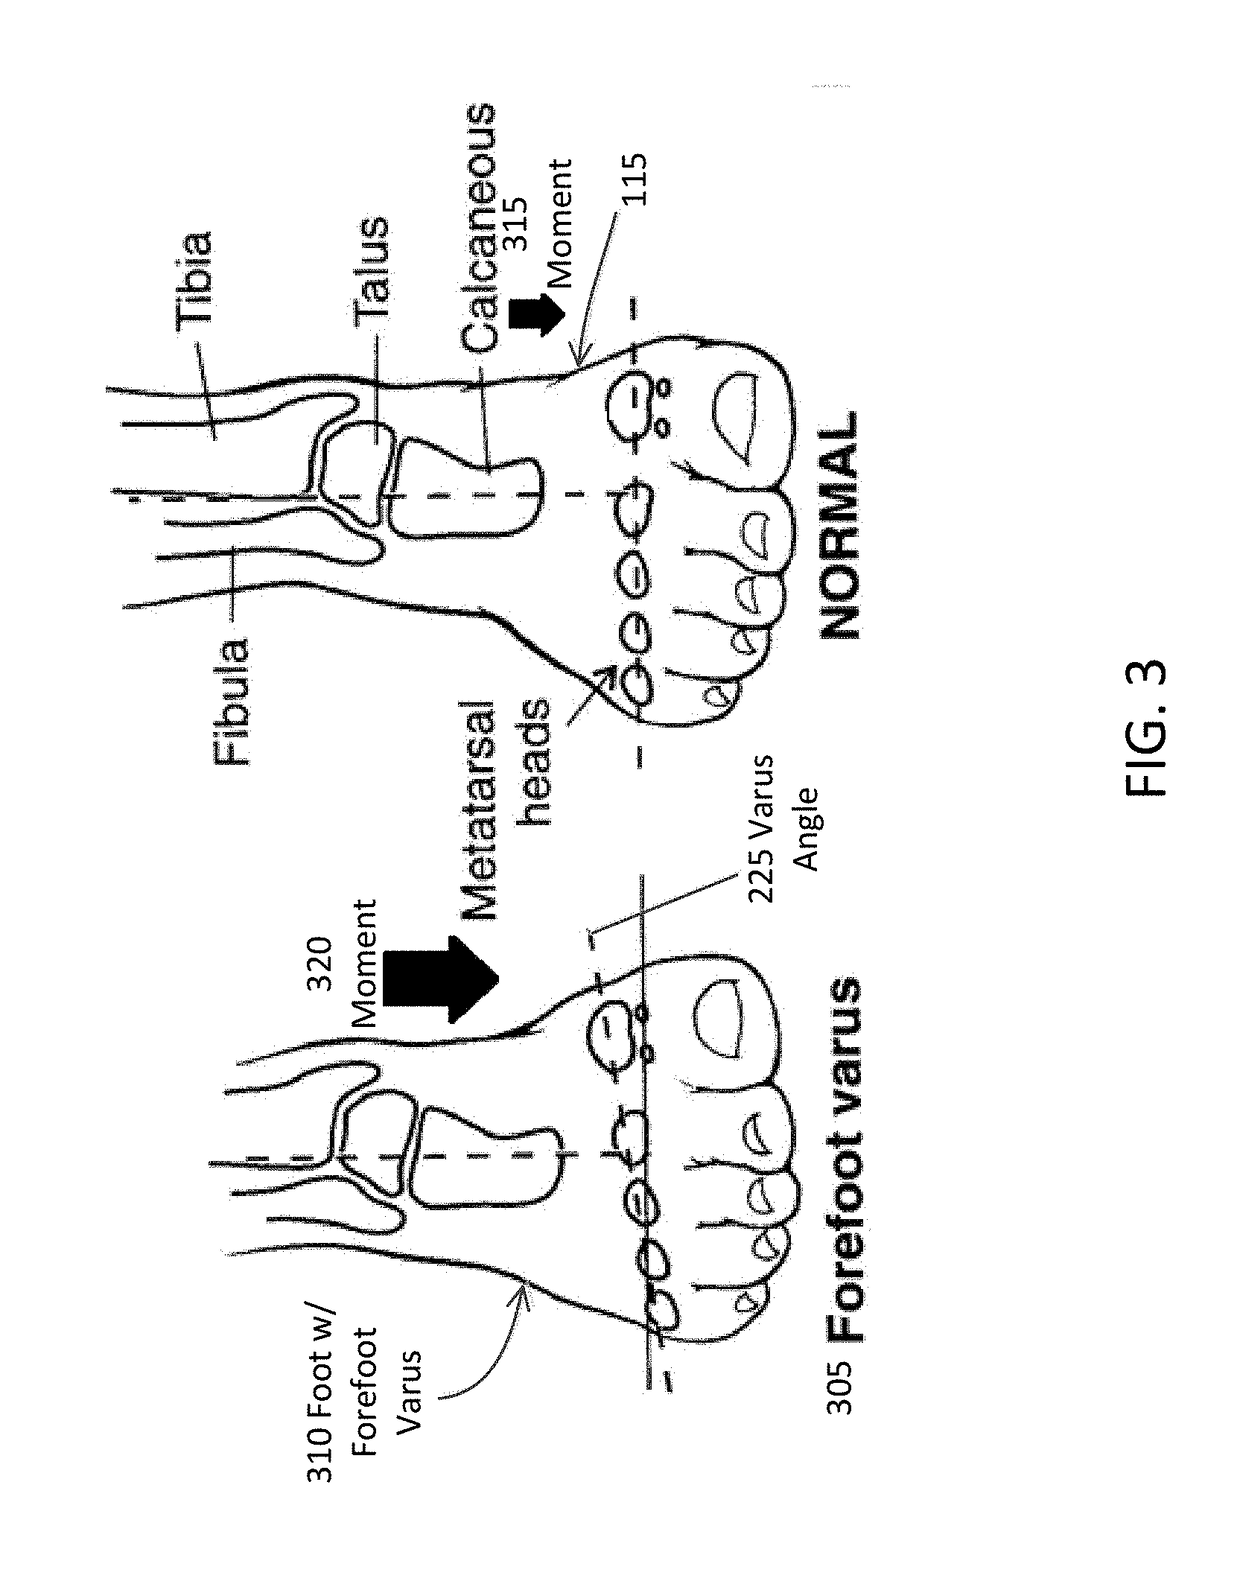 Method and apparatus to assist foot motion about the pronation axis